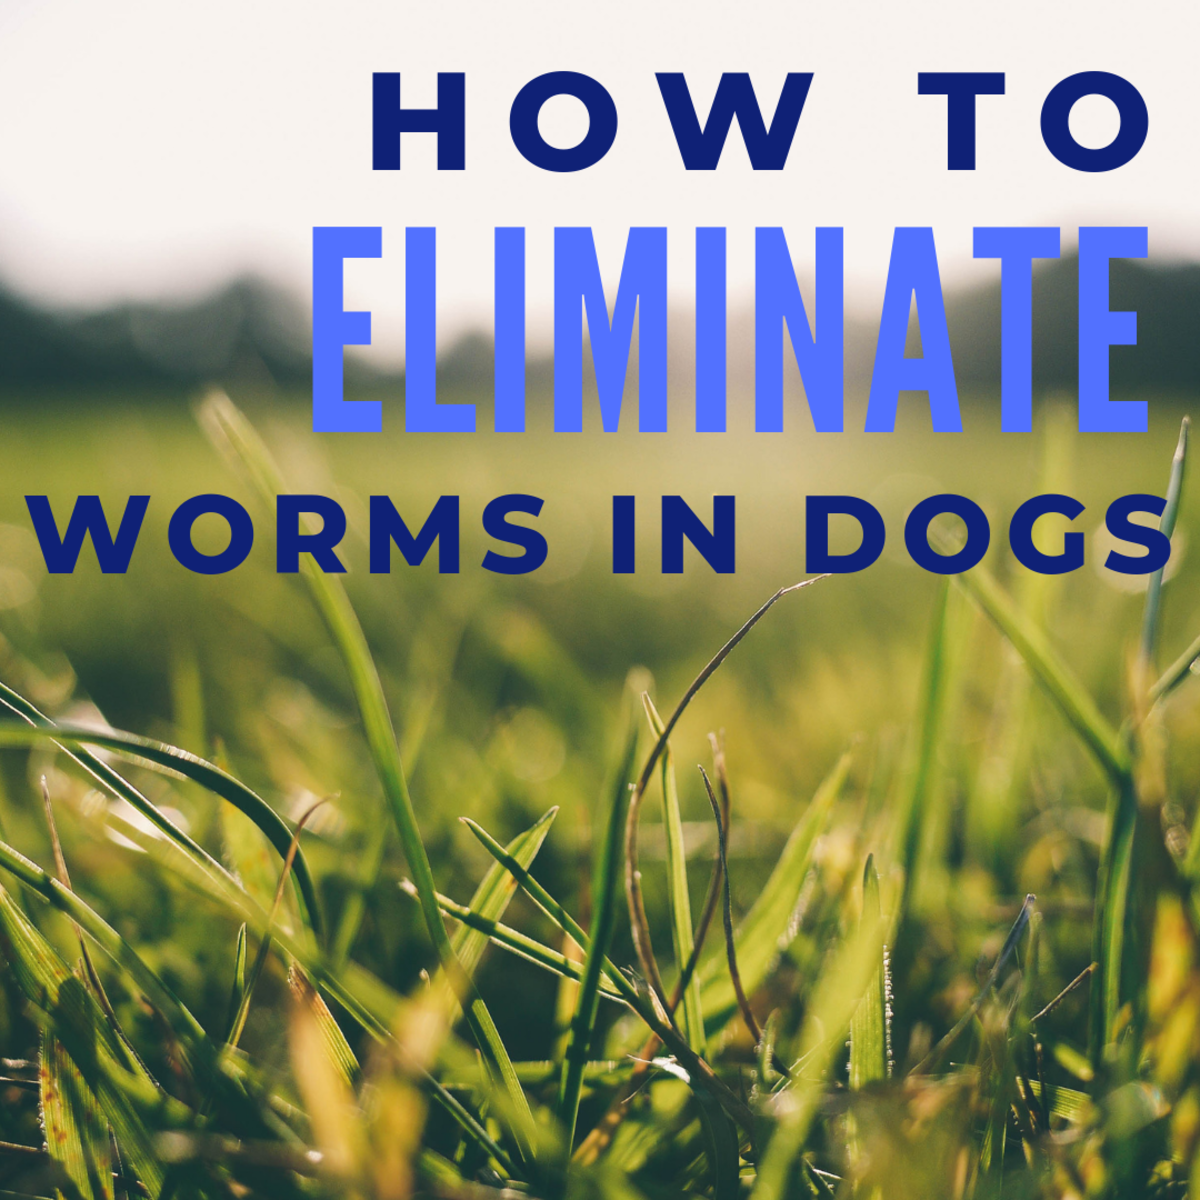 How to Reduce or Eliminate Worms in Dogs